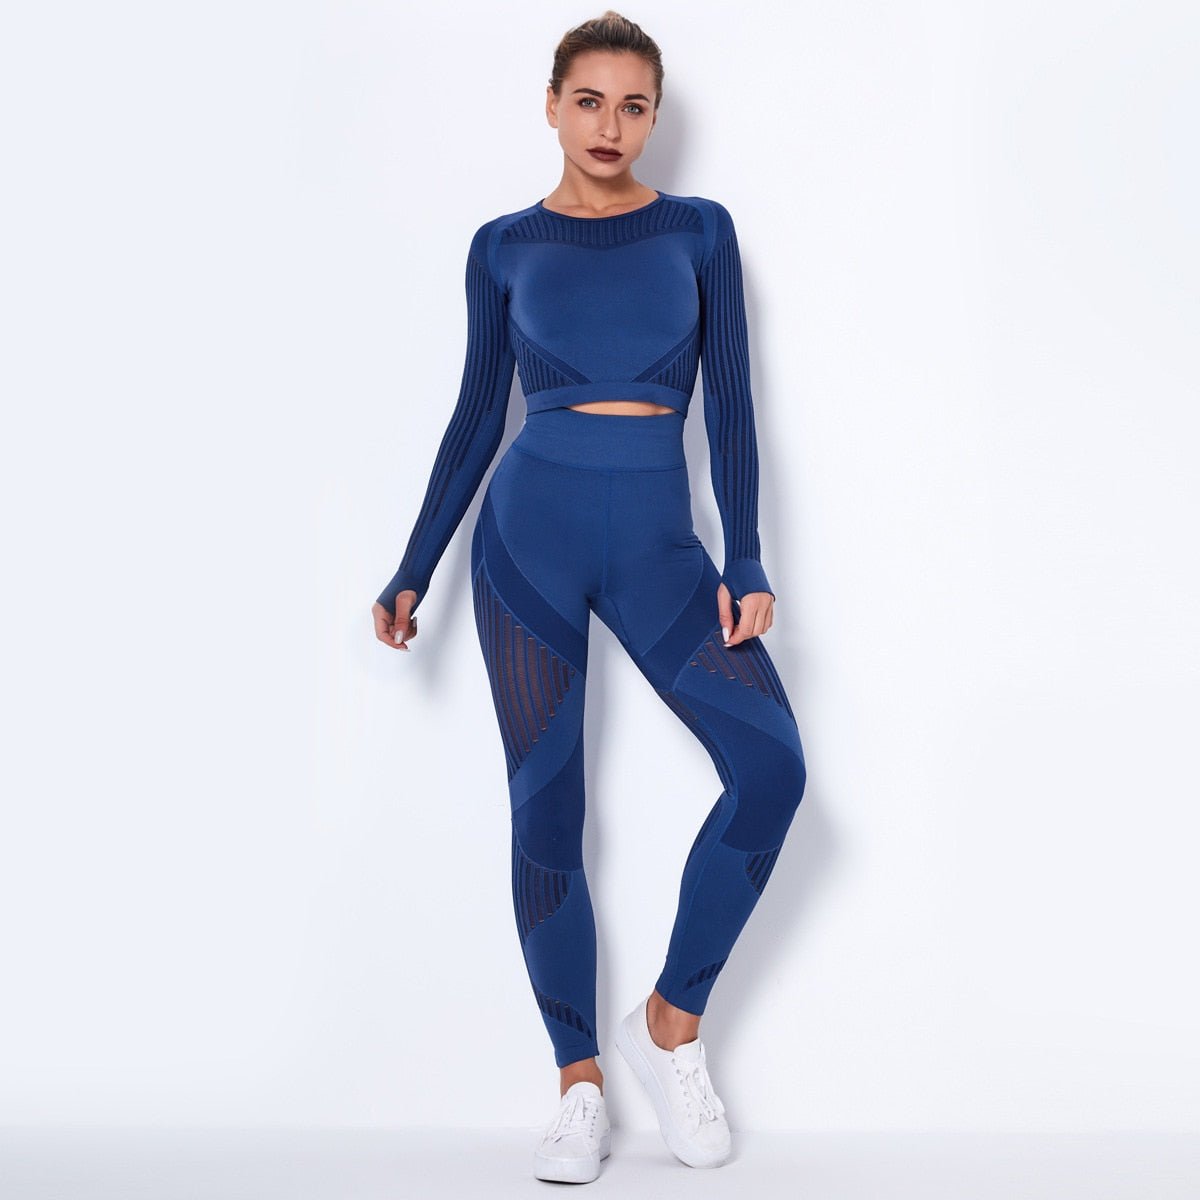  Yoga Outfits For Women 2 Piece Workout Sets